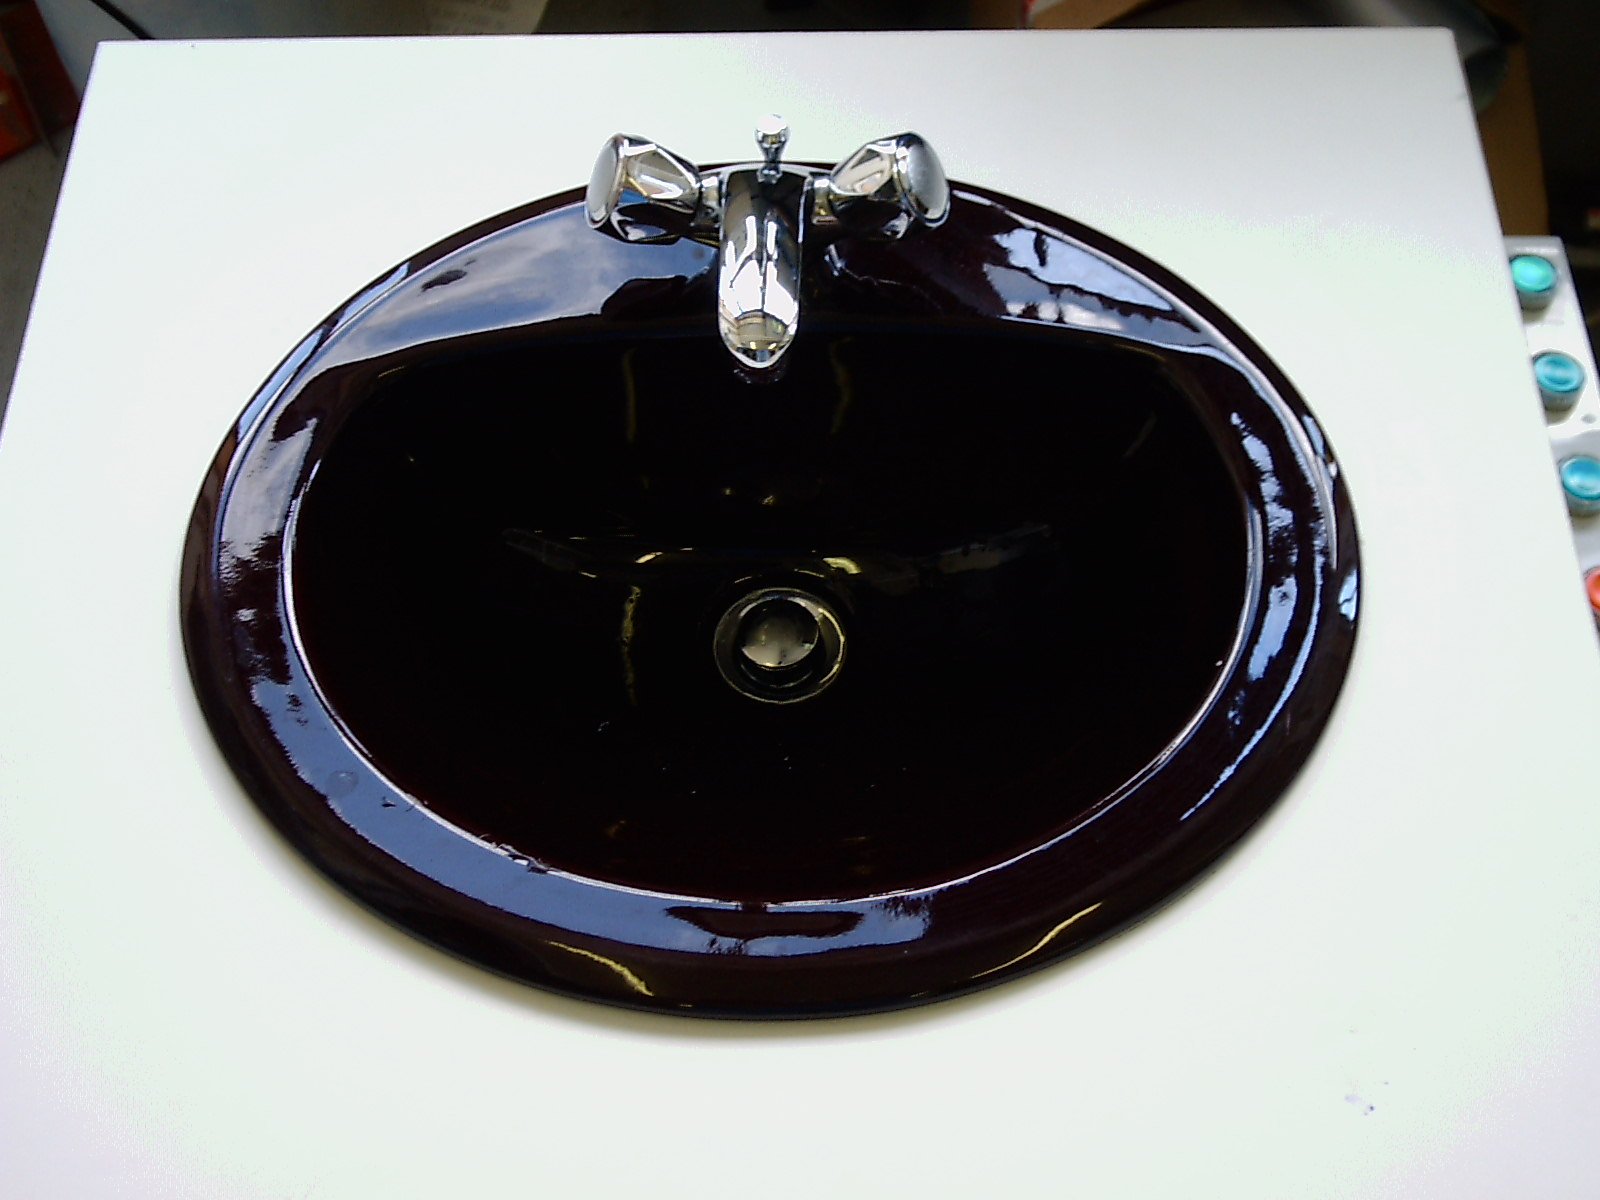 Thermochromic sink before hot water